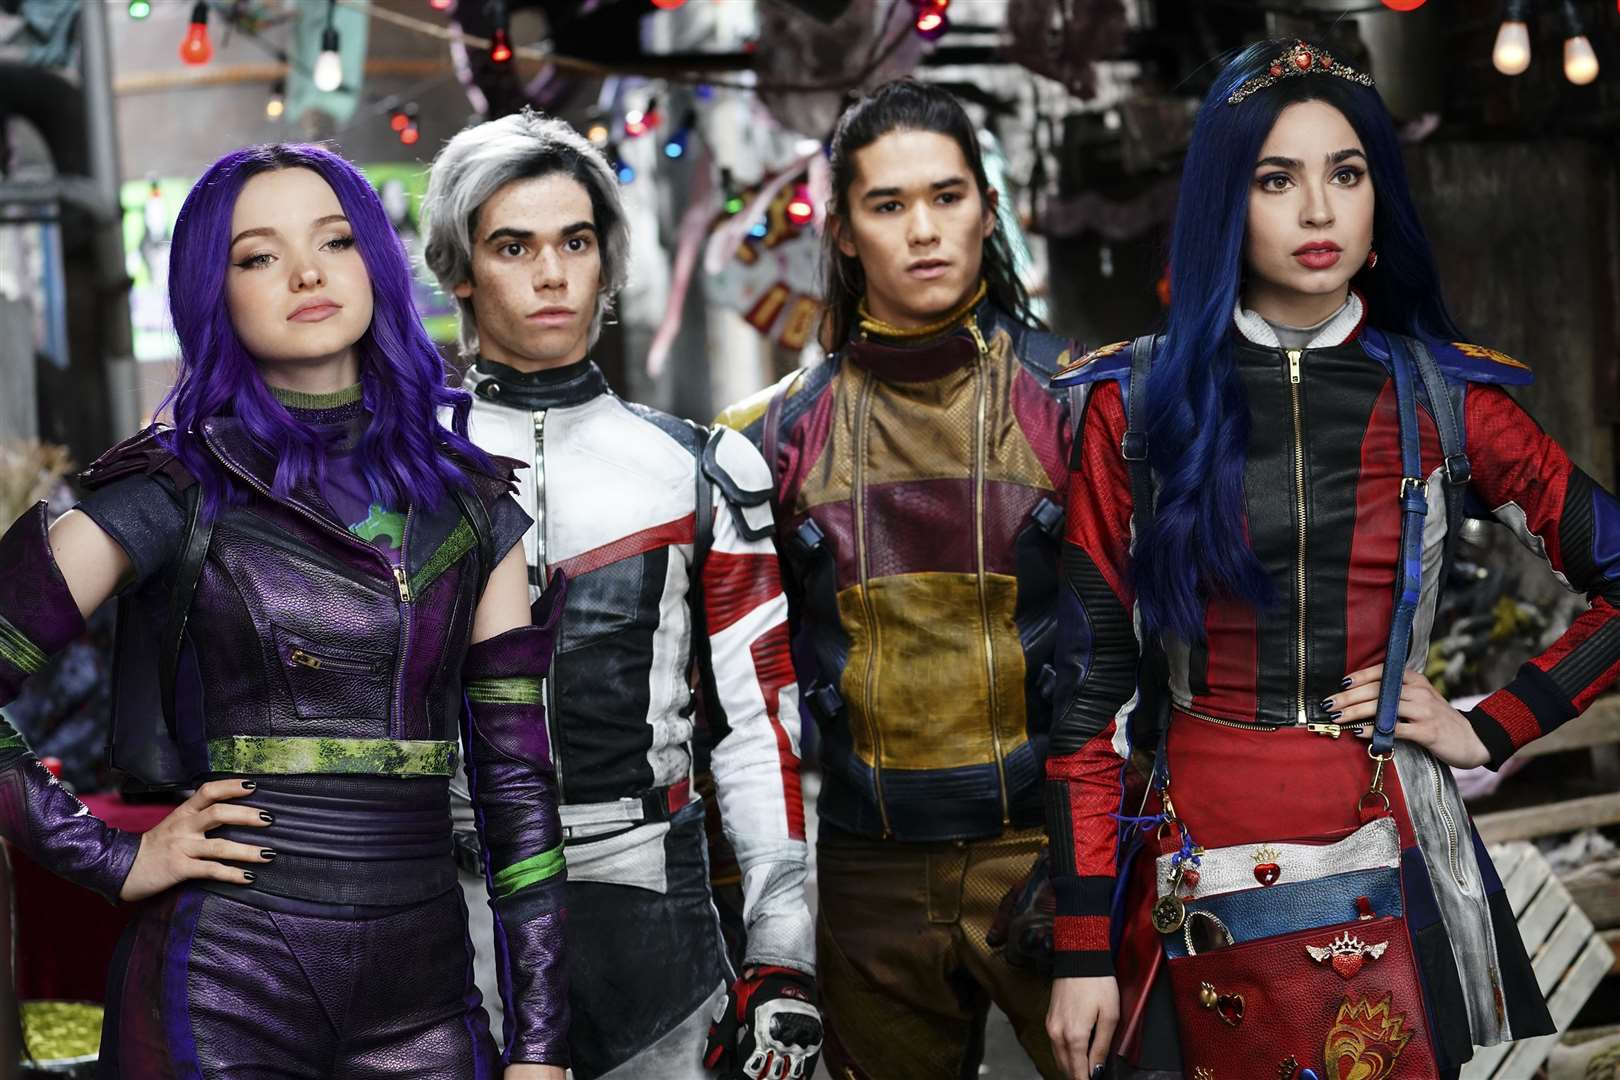 Descendants 3 will be shown in the UK for the first time next month